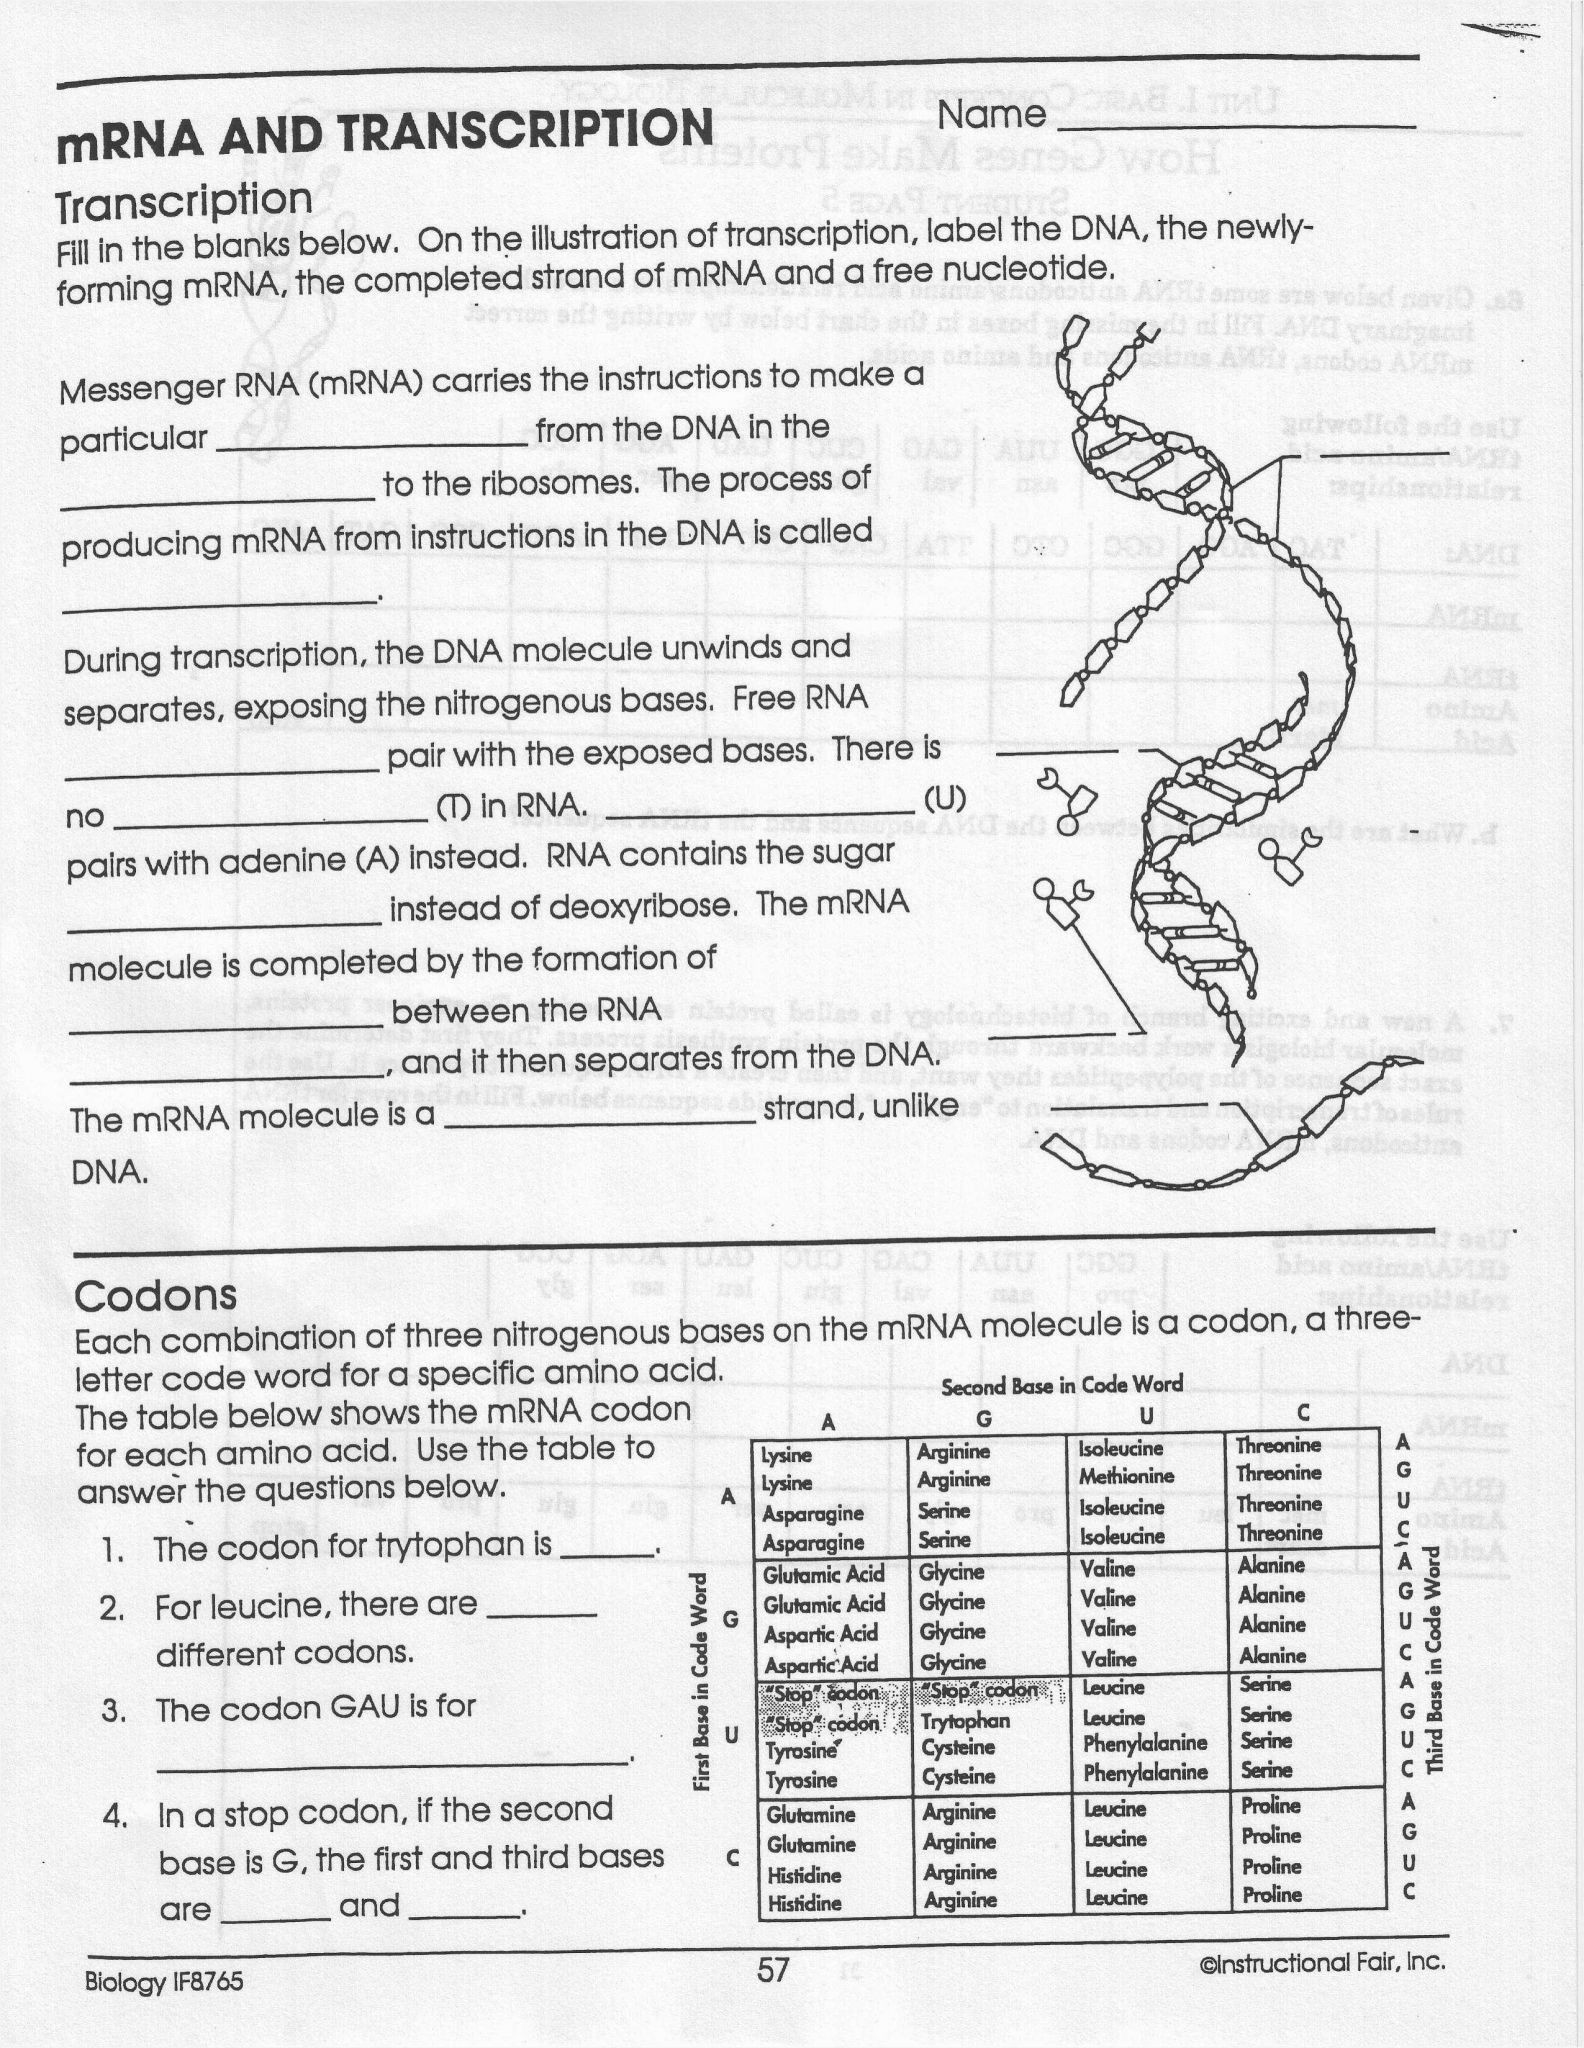 Protein Synthesis Review Worksheet Mrna and Transcription Worksheet Answers In 2020